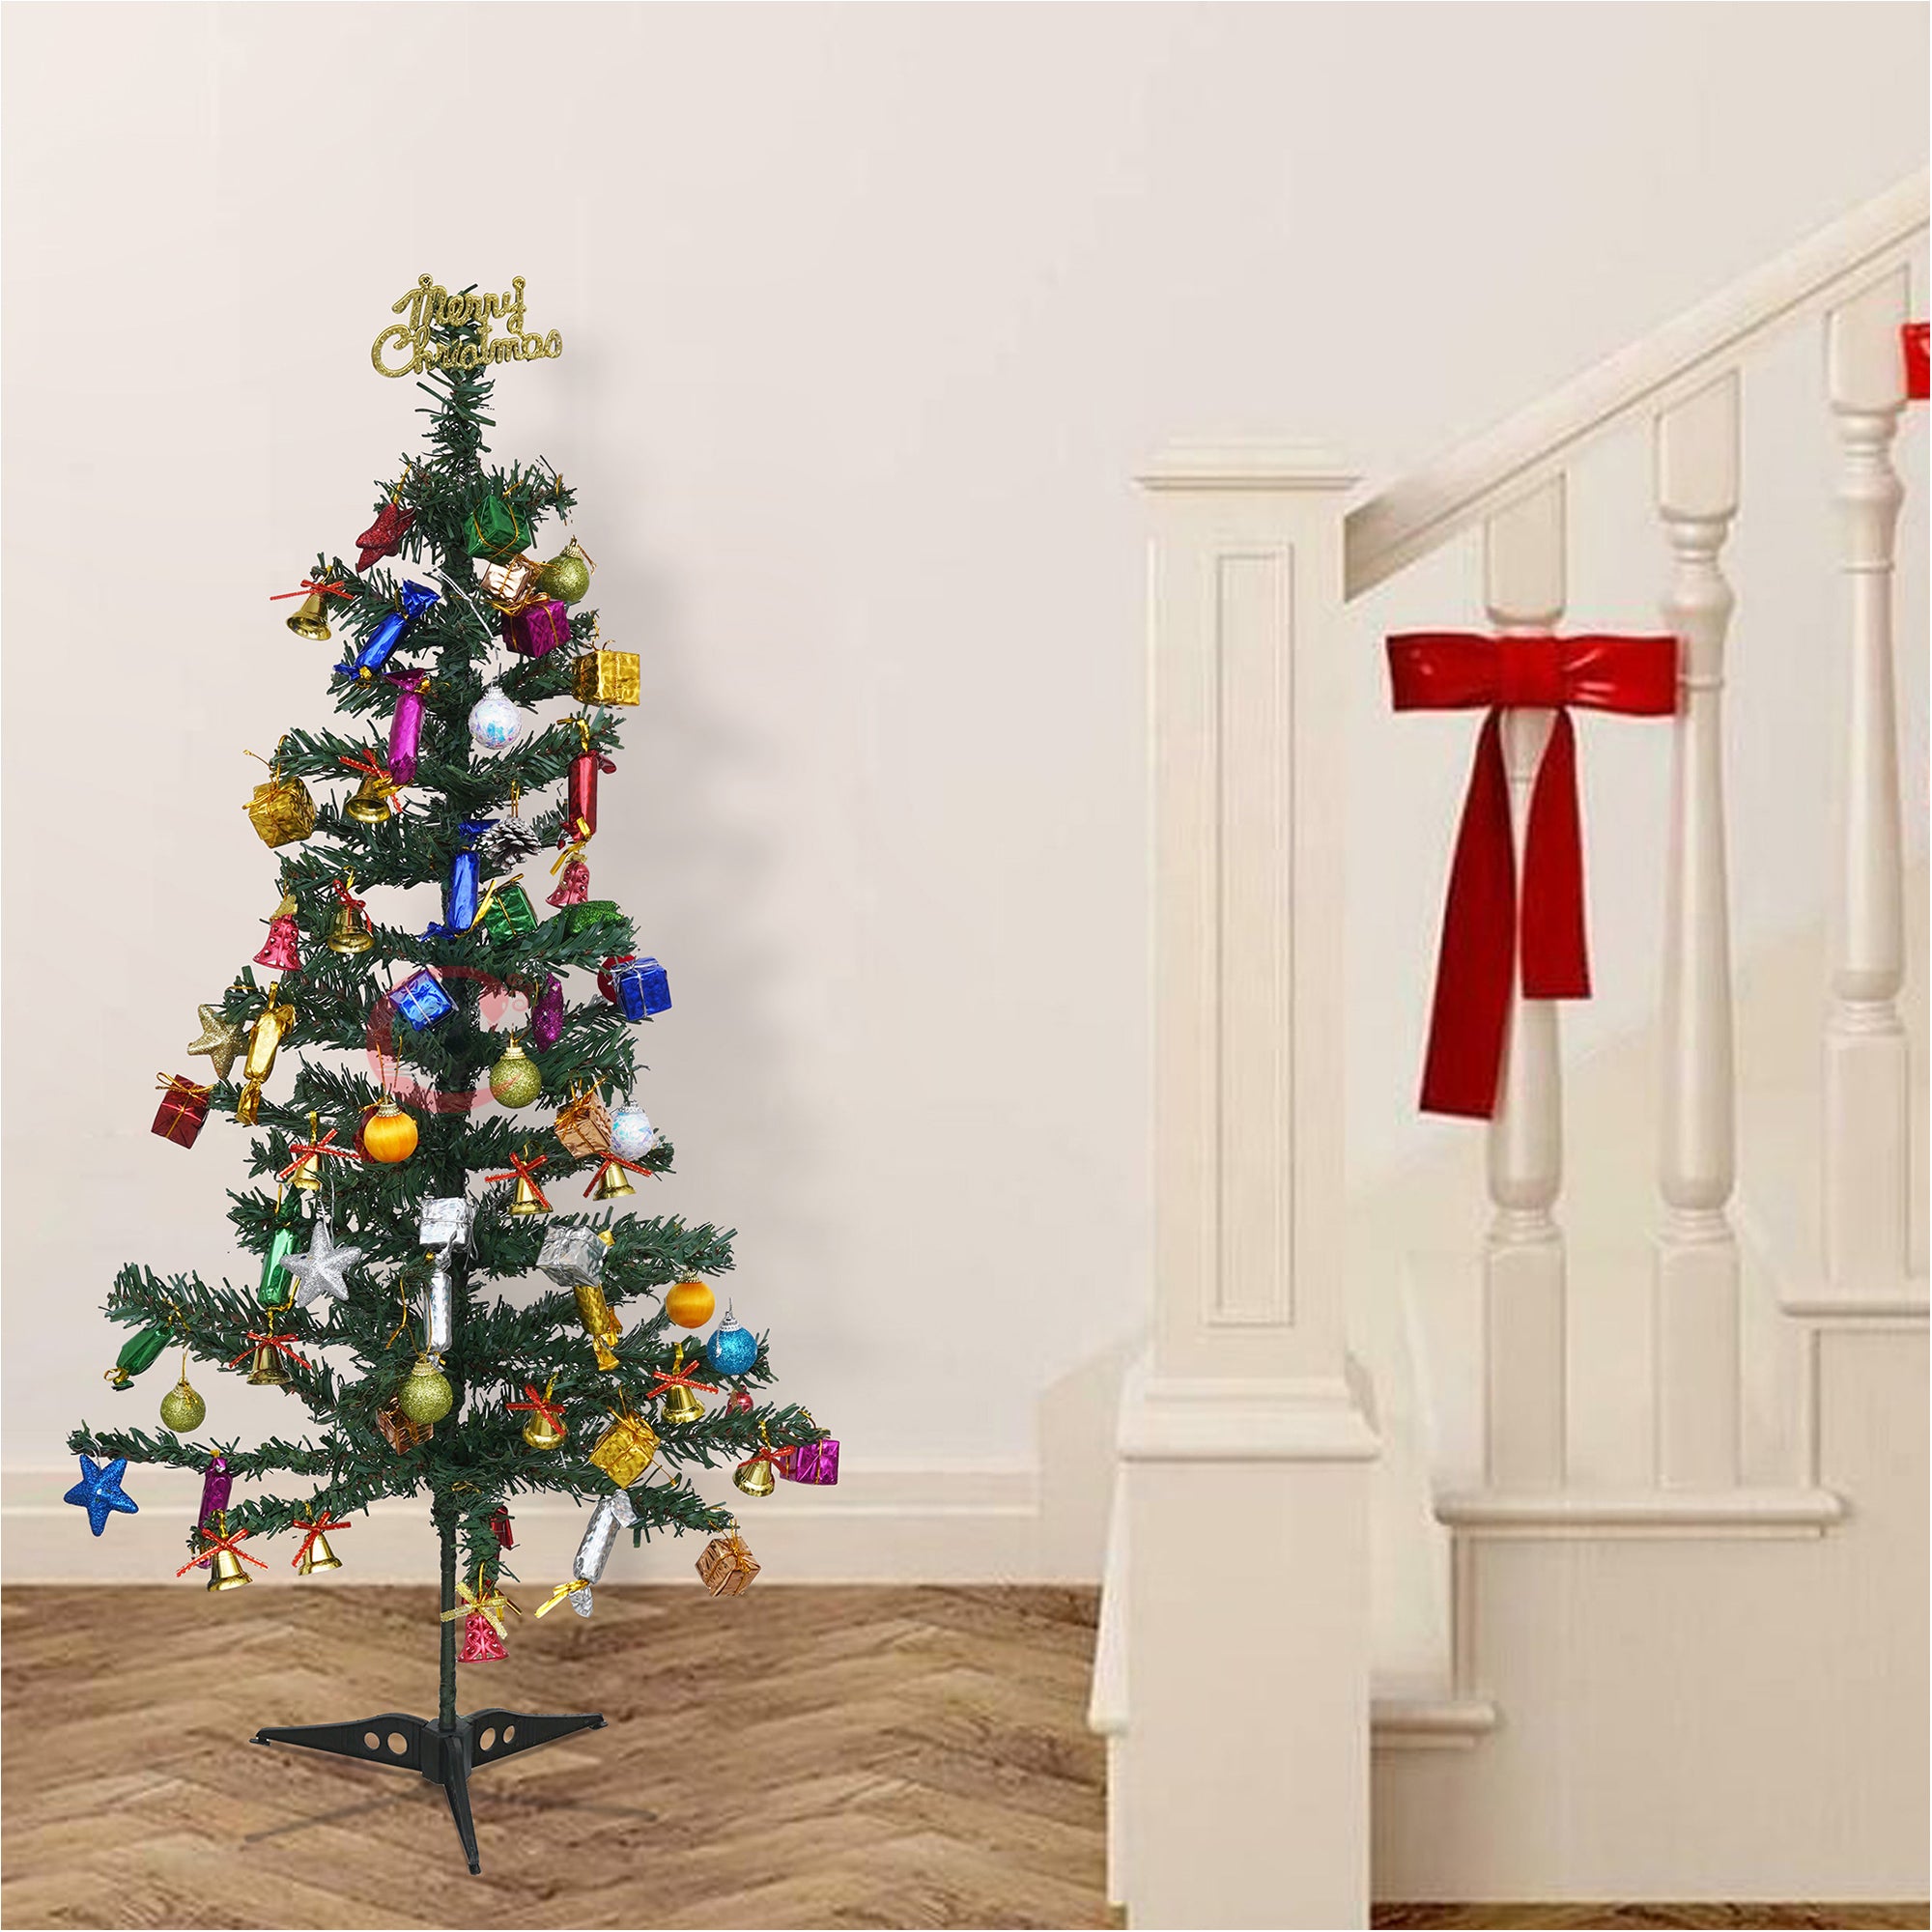 eCraftIndia 4 Feet Green Artificial Christmas Tree Xmas Pine Tree with Stand and 60 Christmas Decoration Ornaments Props - Merry Christmas Decoration Item for Home, Office, and Church 1